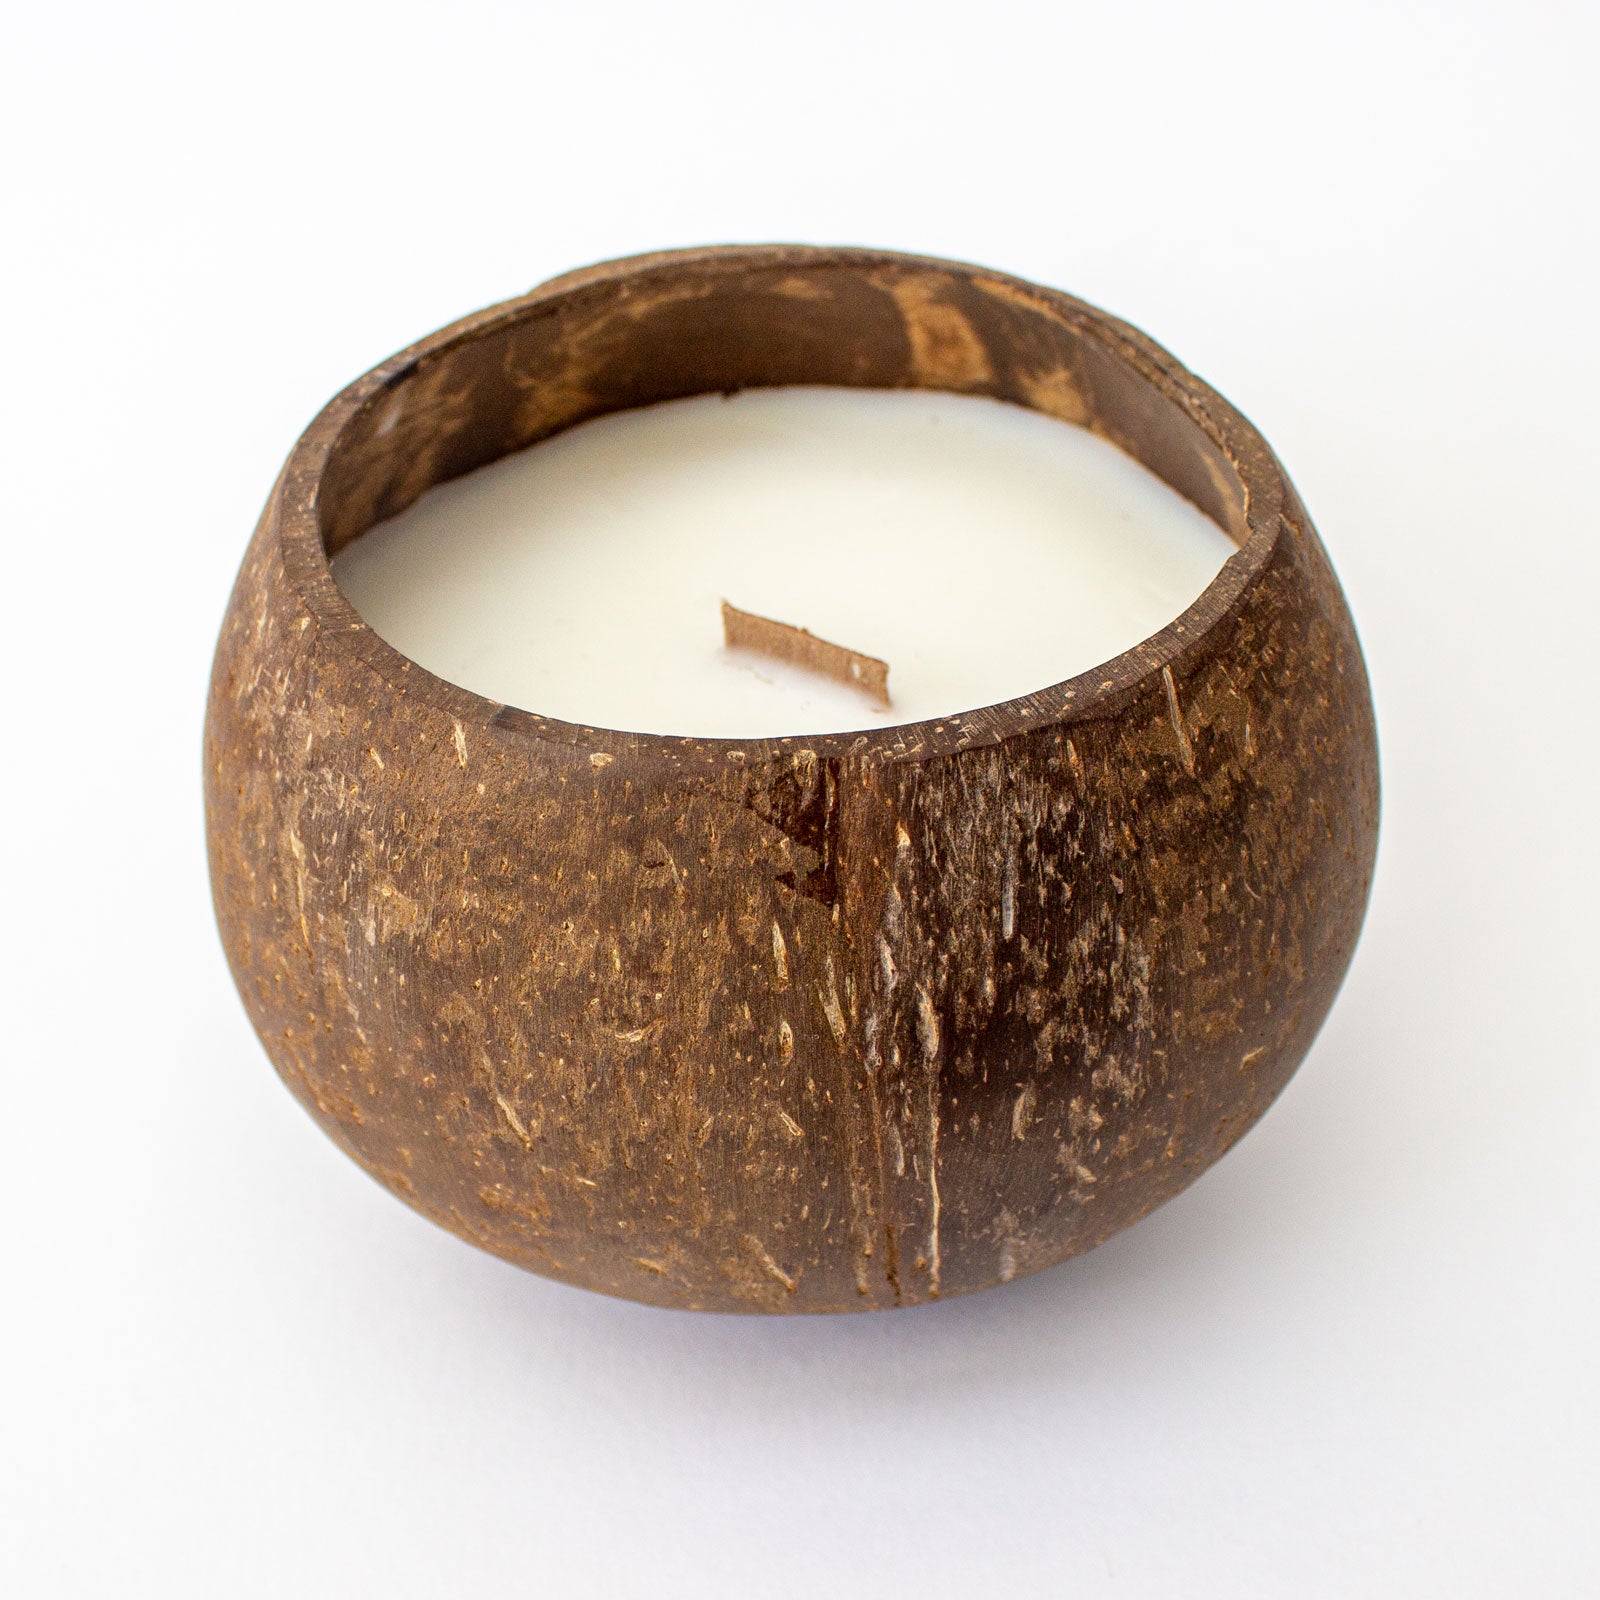 I'LL MISS YOU - Toasted Coconut Bowl Candle – Soy Wax - Gift Present